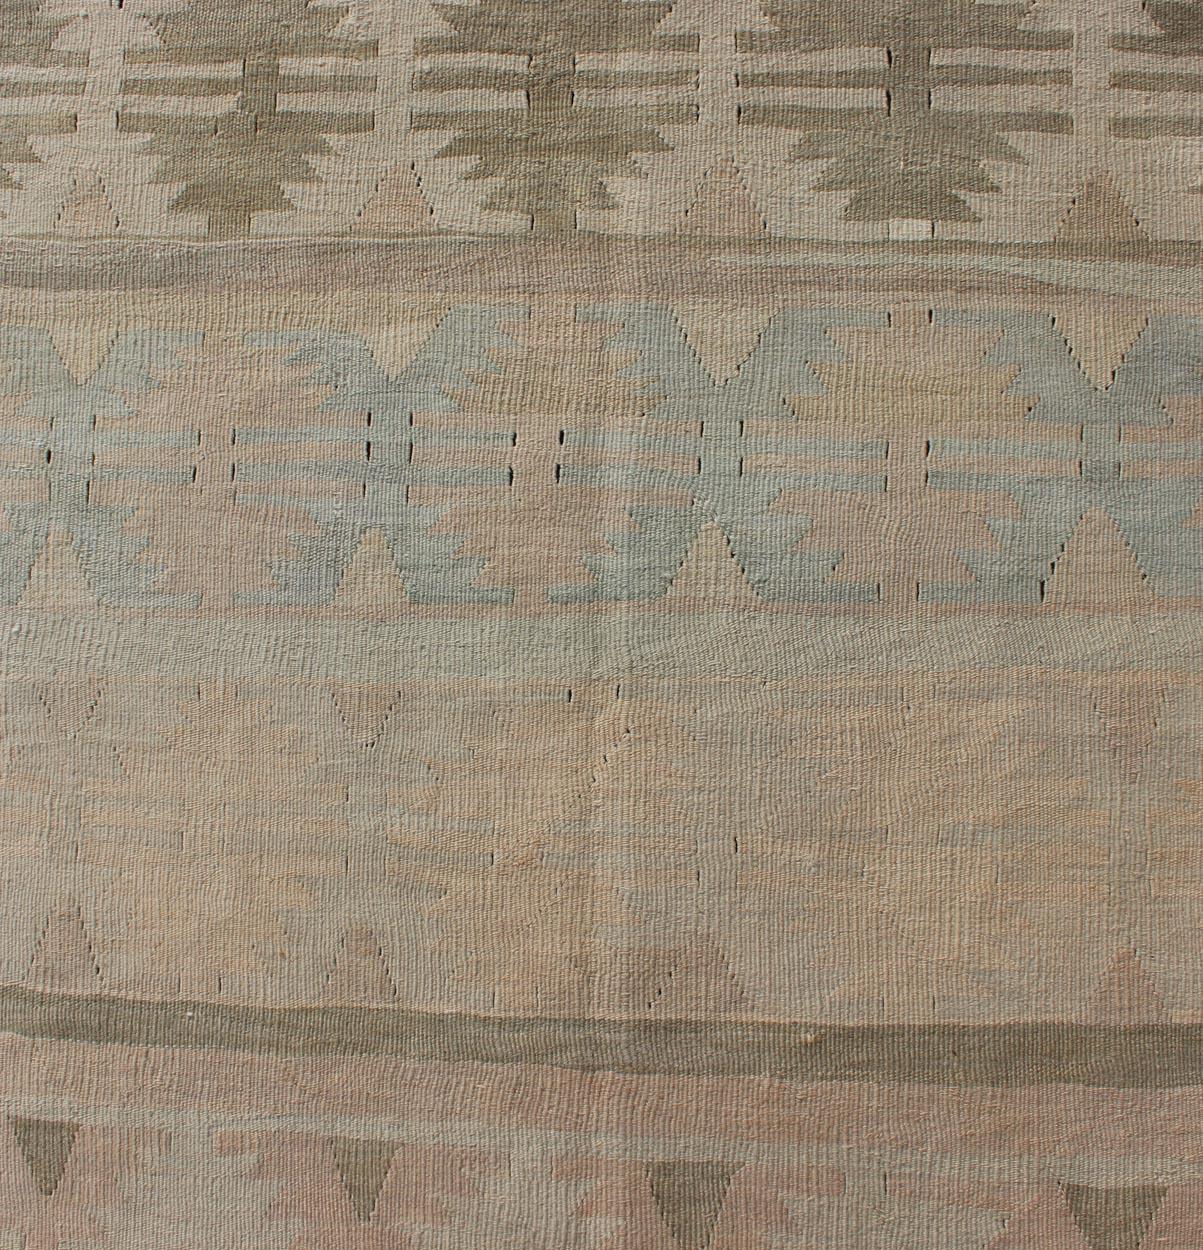 Vintage Turkish Kilim Runner with a Stripe Design in Muted Earthy Color Tones In Good Condition For Sale In Atlanta, GA